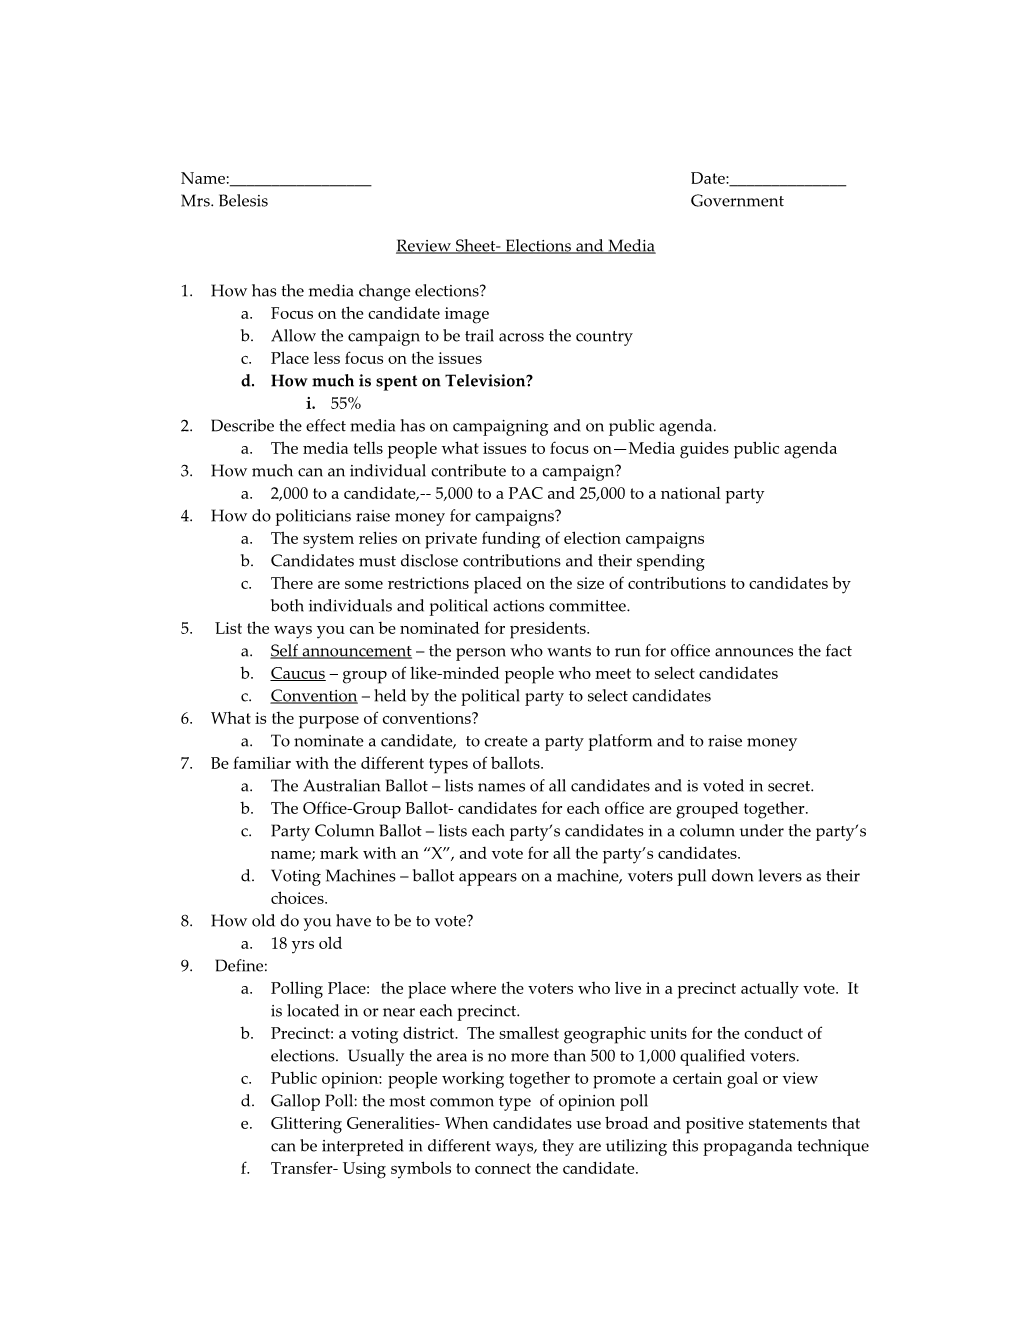 Review Sheet- Elections and Media